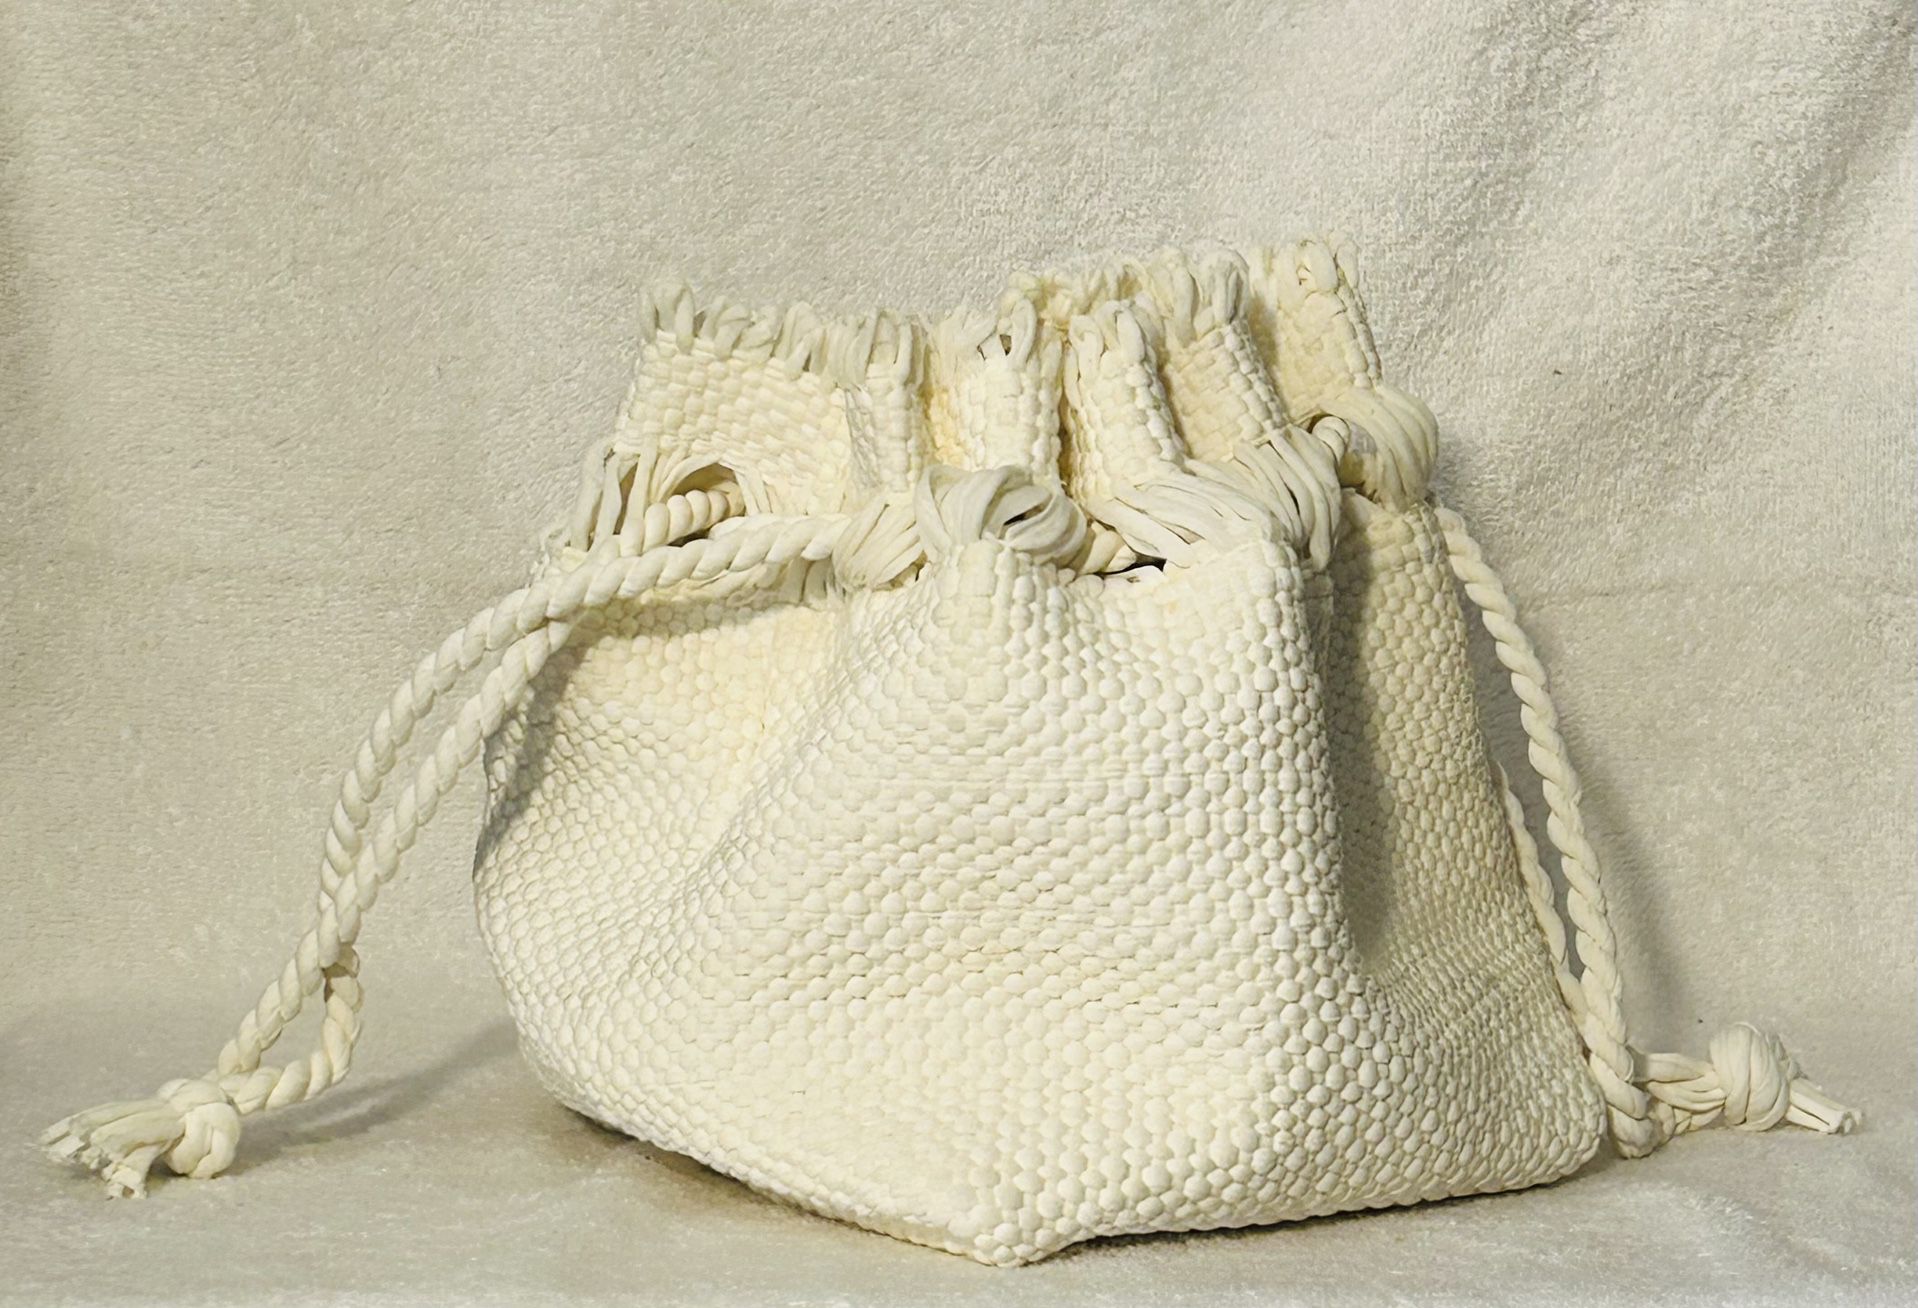 Handcrafted Women’s Woven Drawstring Cream Colored Bucket  Party Bag